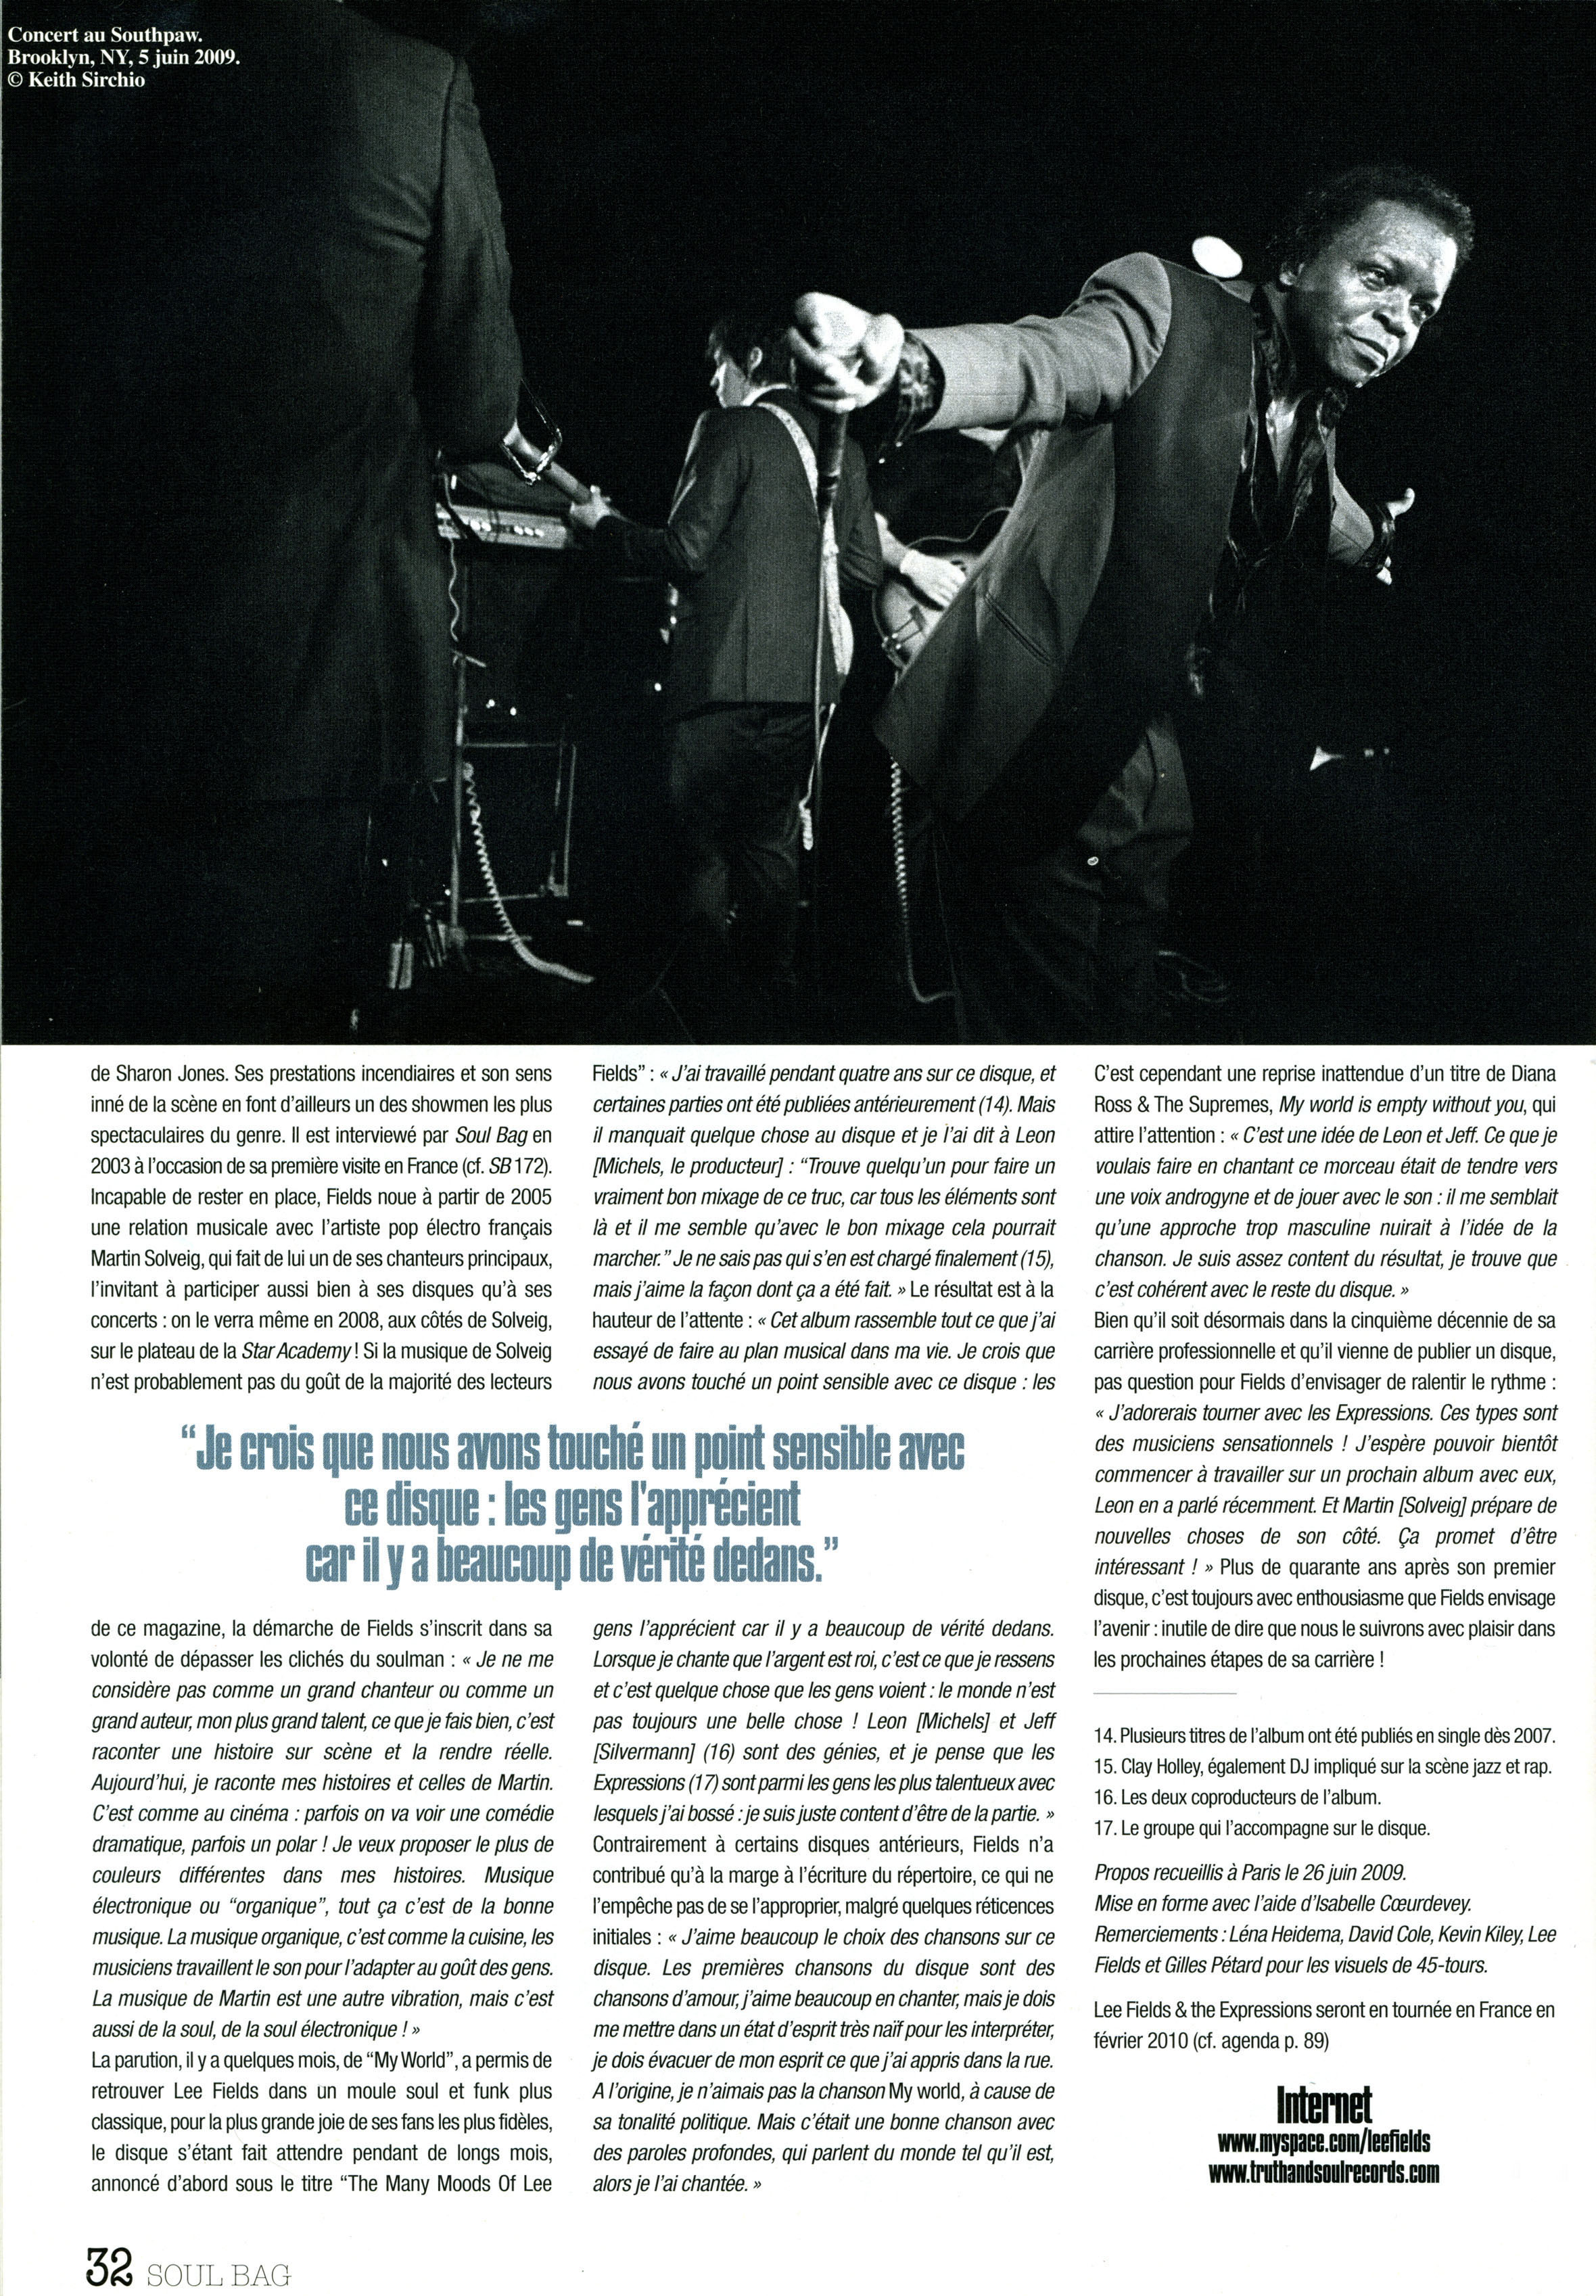 Soul Bag, French Music Magazine featuring Lee Fields